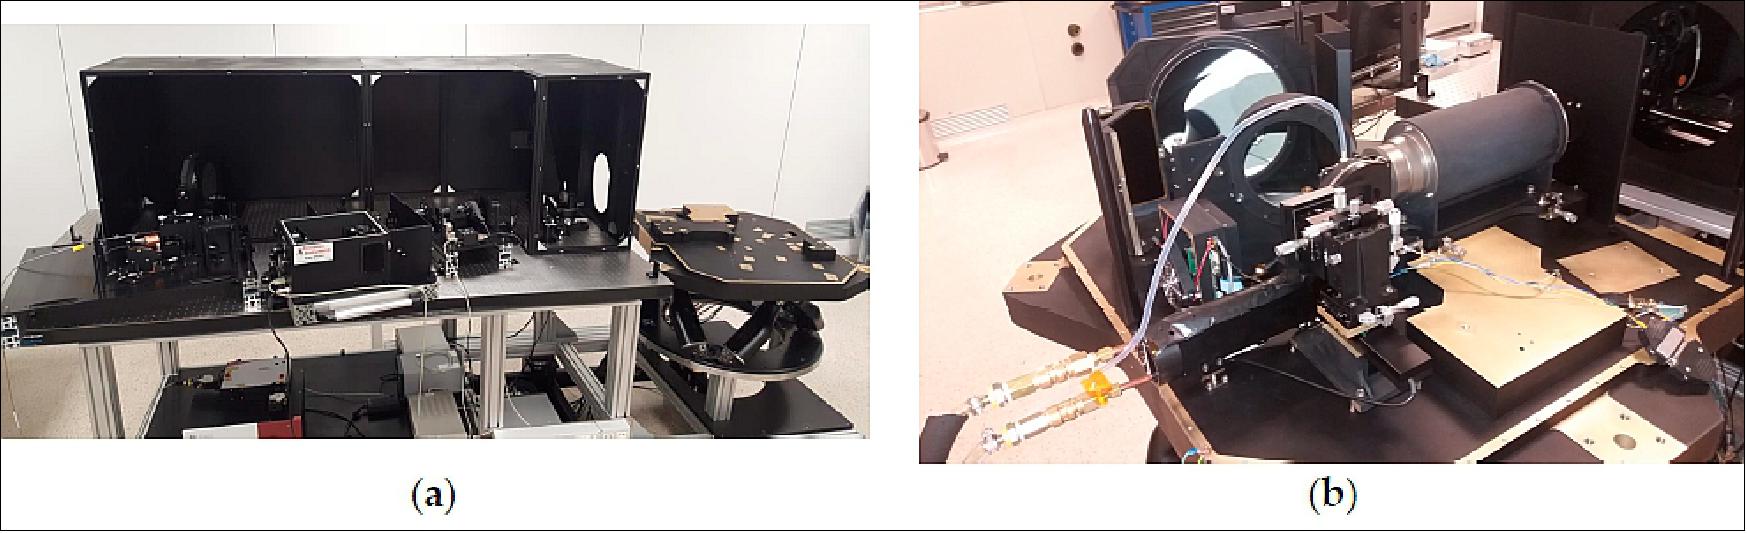 Figure 27: (a) Optical Ground Support Equipment (OGSE) used for the phase A-B1 tests of the FLORIS BreadBoard (BB), (b) FLORIS BB for telescope and HR spectrometer (image credit: FLEX collaboration)